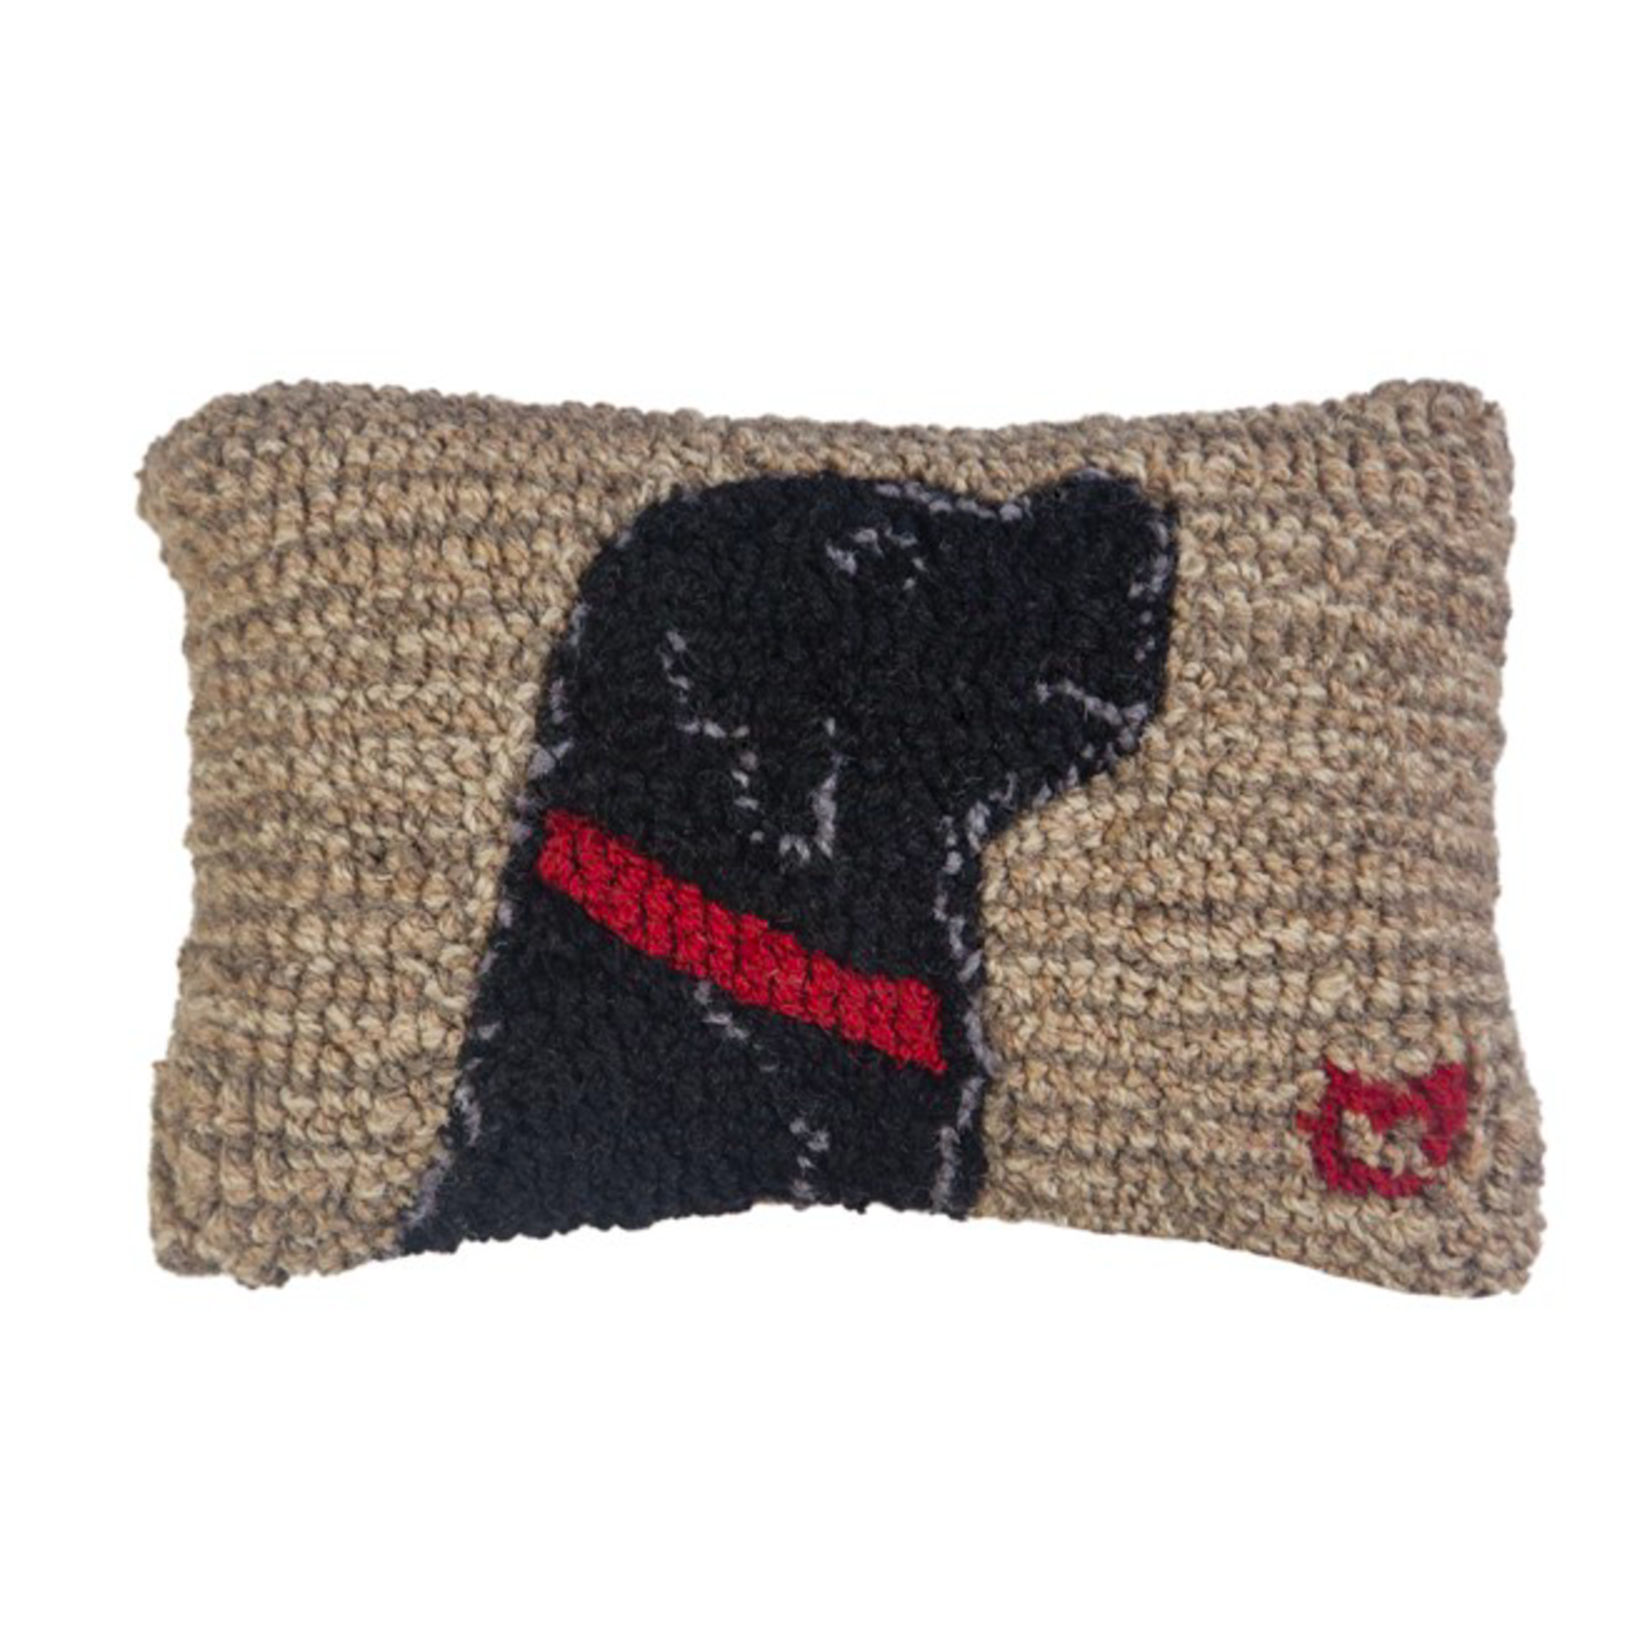 Begging Lab - Wool Hooked Pillow